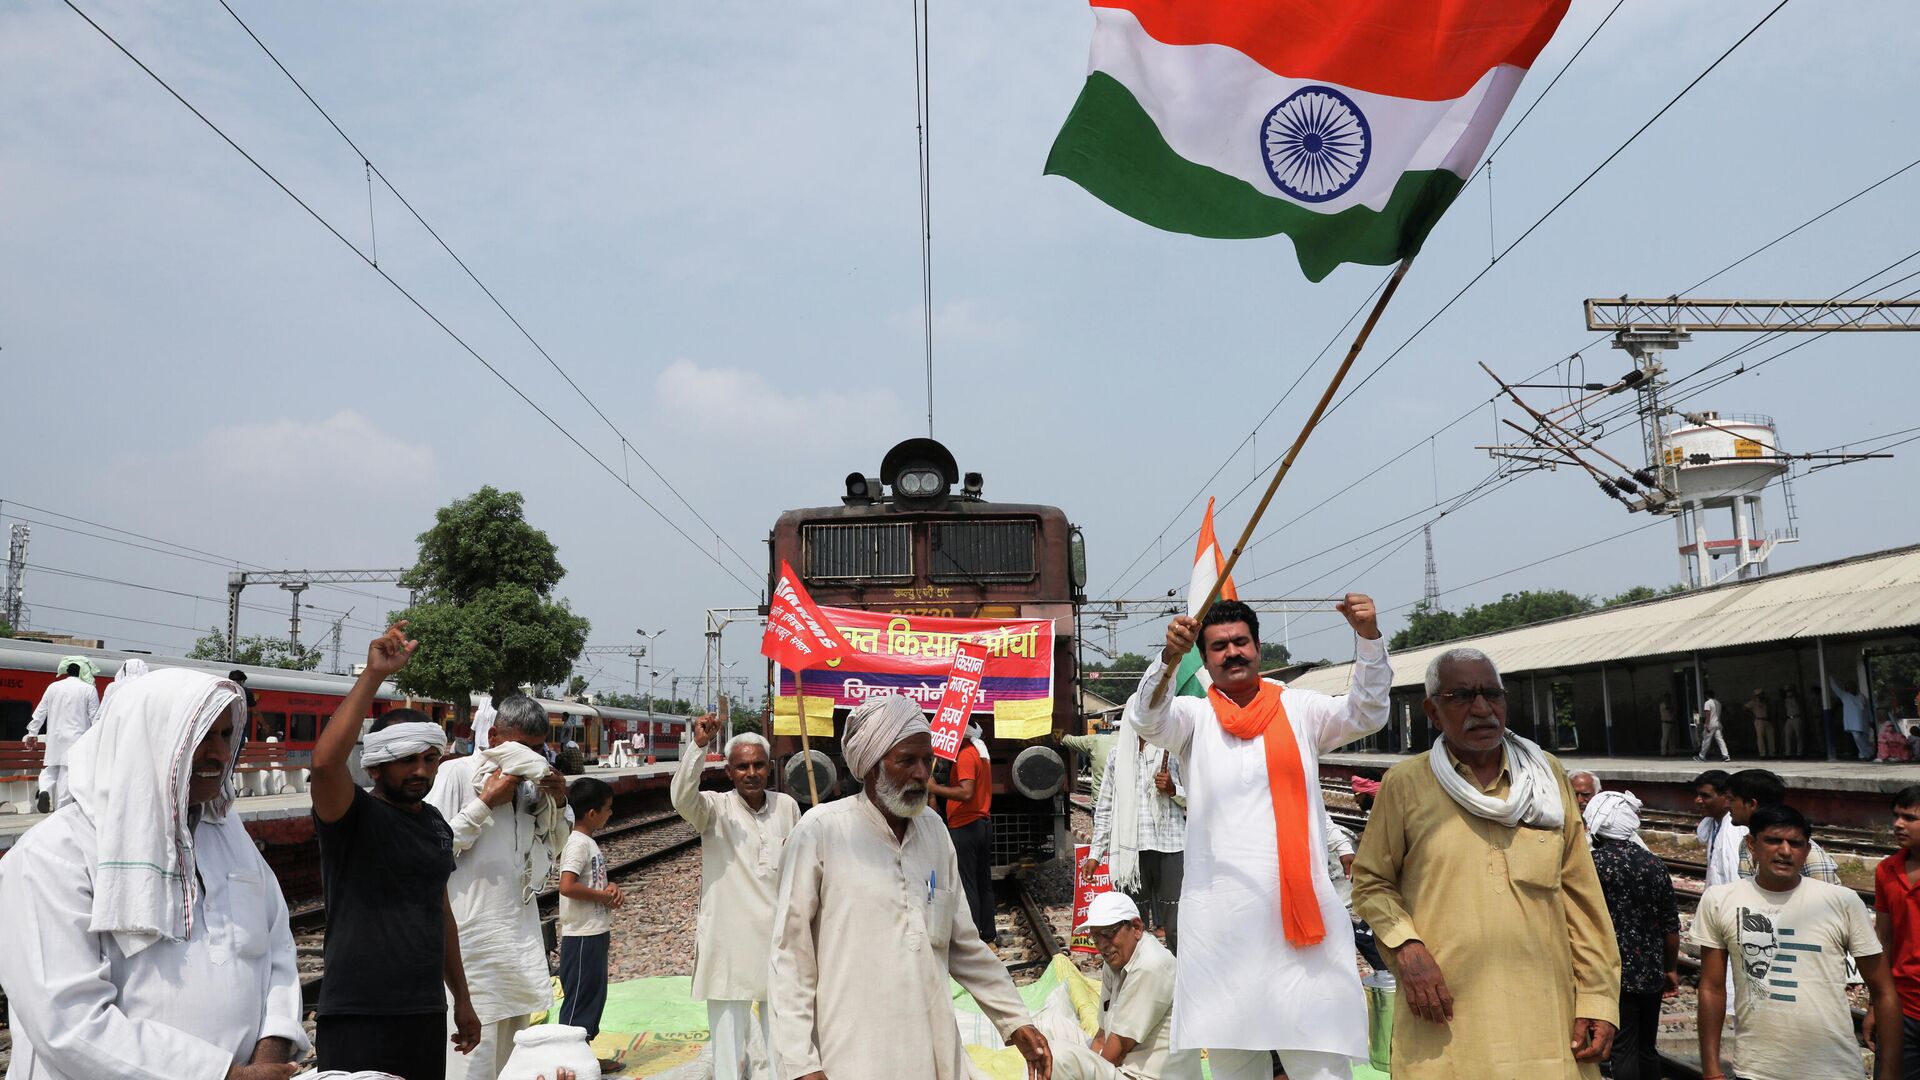 Farmers block railway tracks as part of protests against farm laws during nationwide protests, in Sonipat, northern state of Haryana, India, September 27, 2021 - Sputnik International, 1920, 27.09.2021